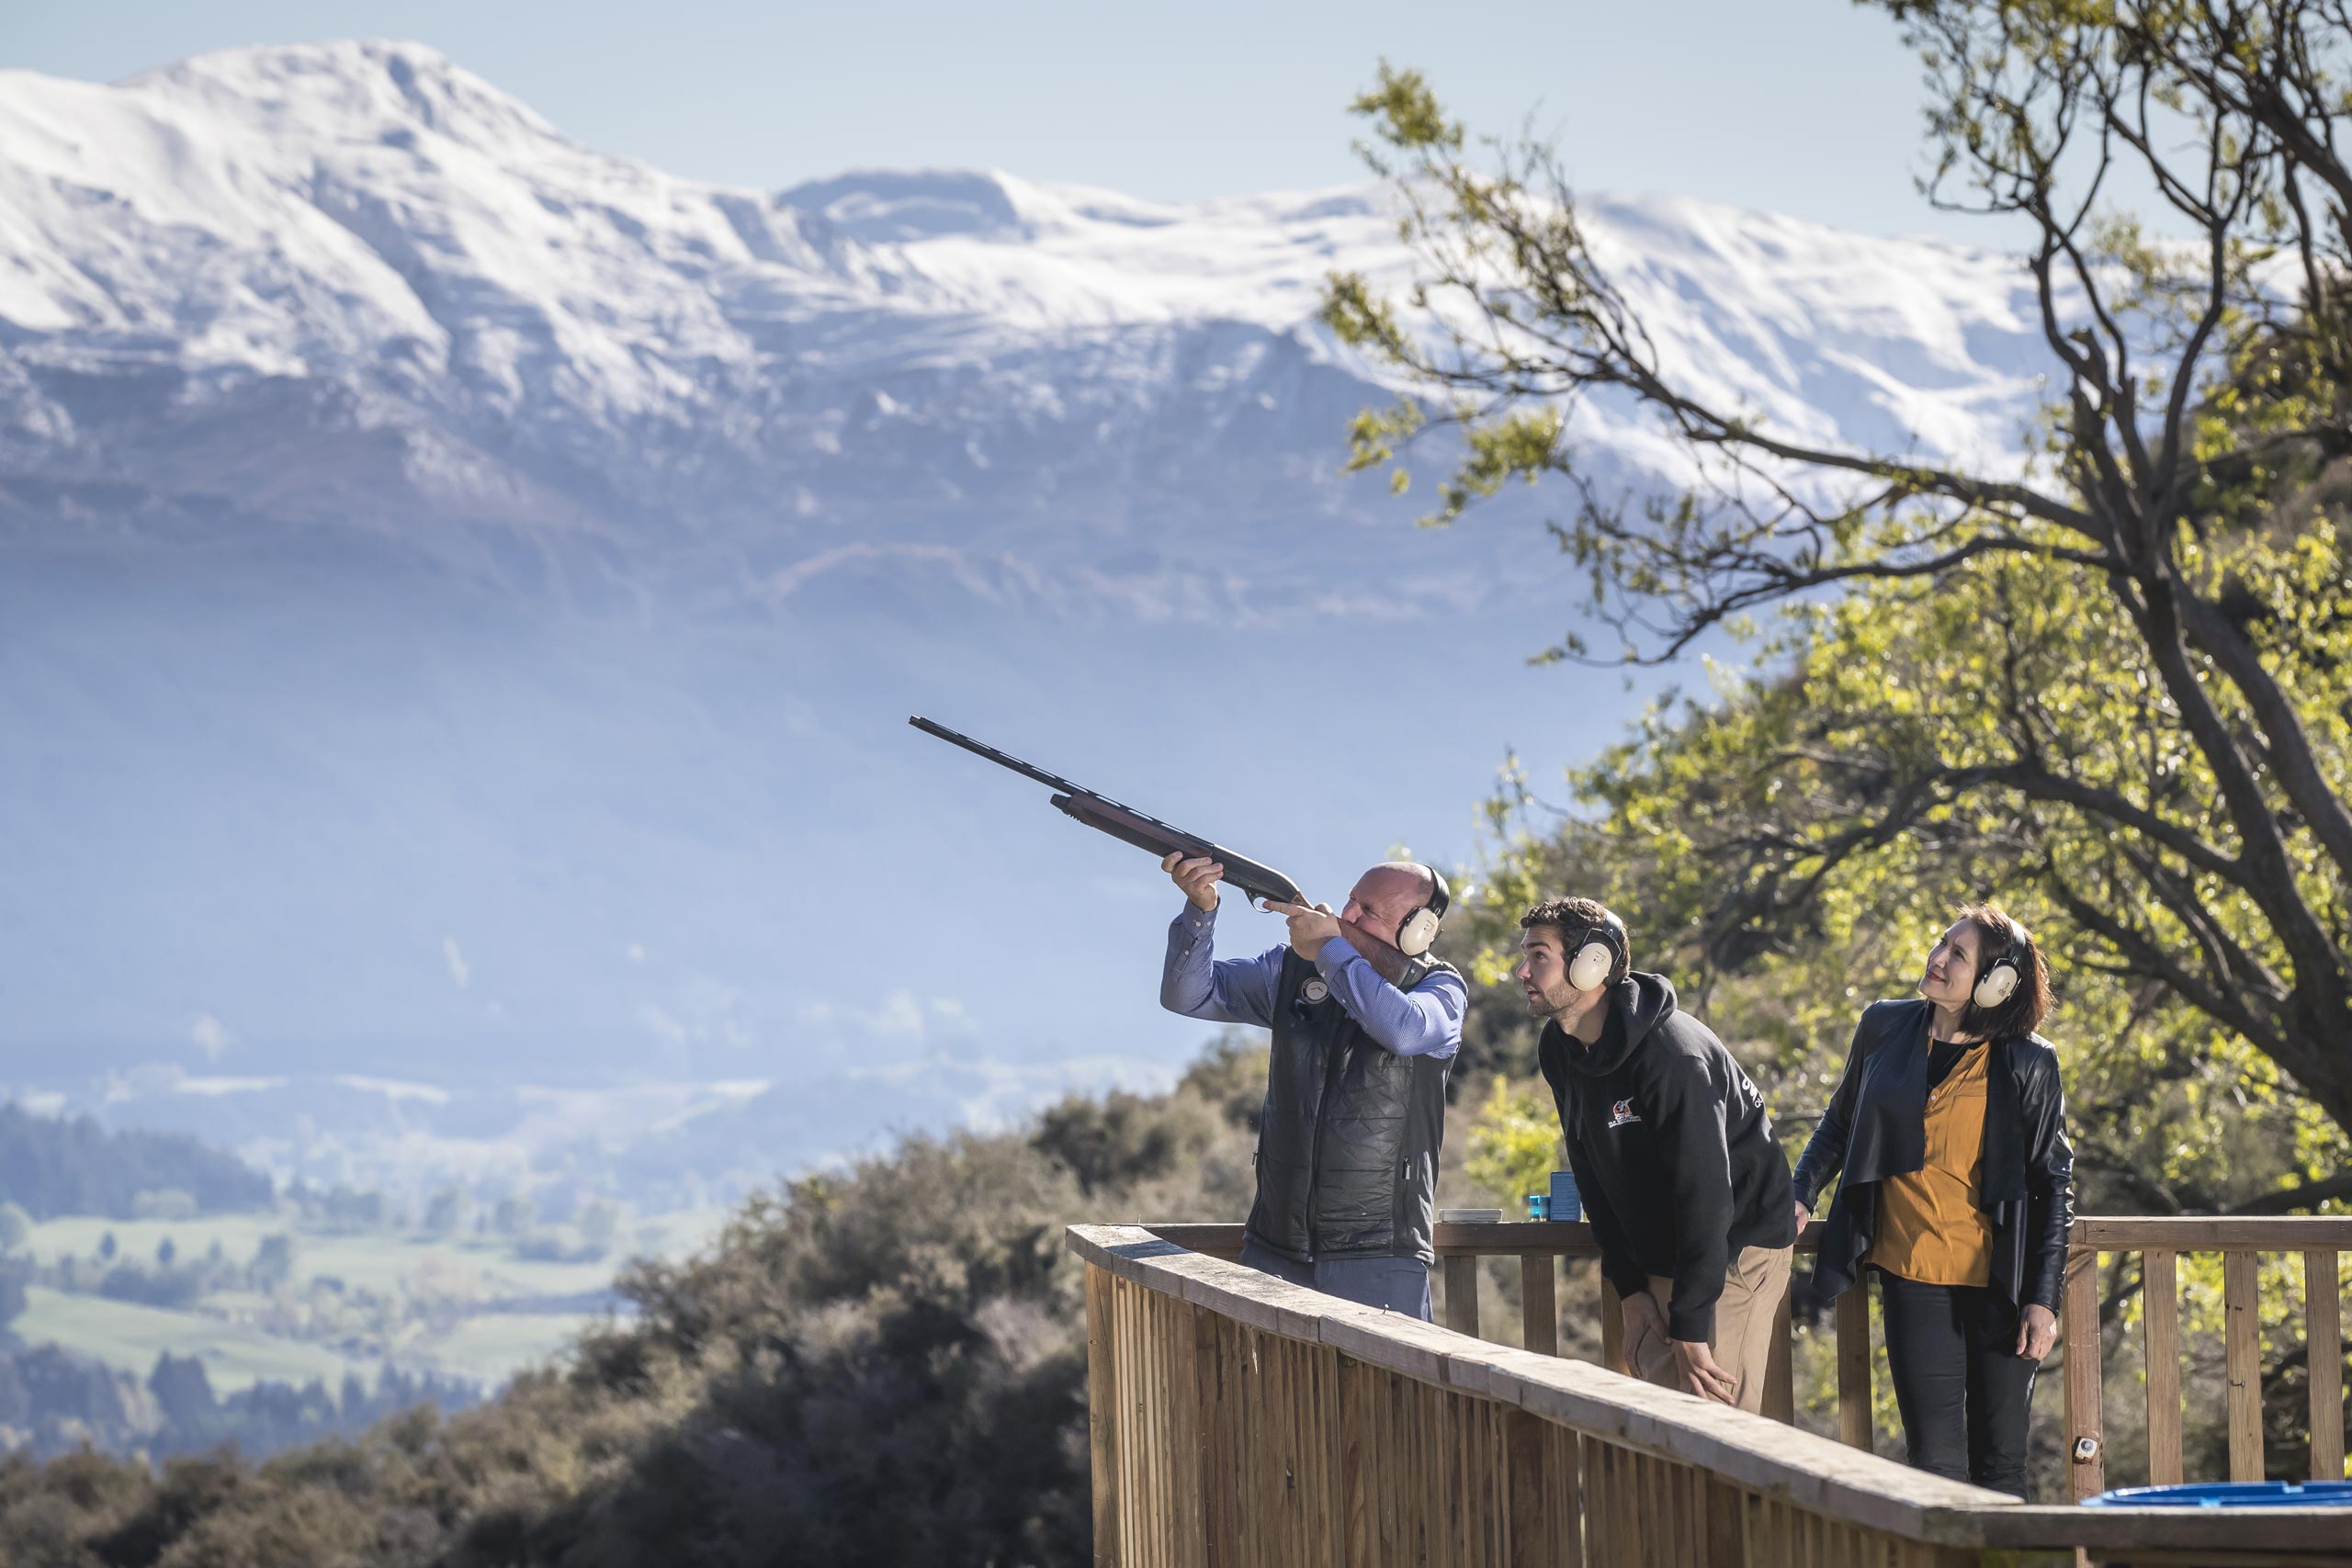 Break One Clay Target Shooting Instructor helping man fire gun with beautiful Queenstown mountains in background